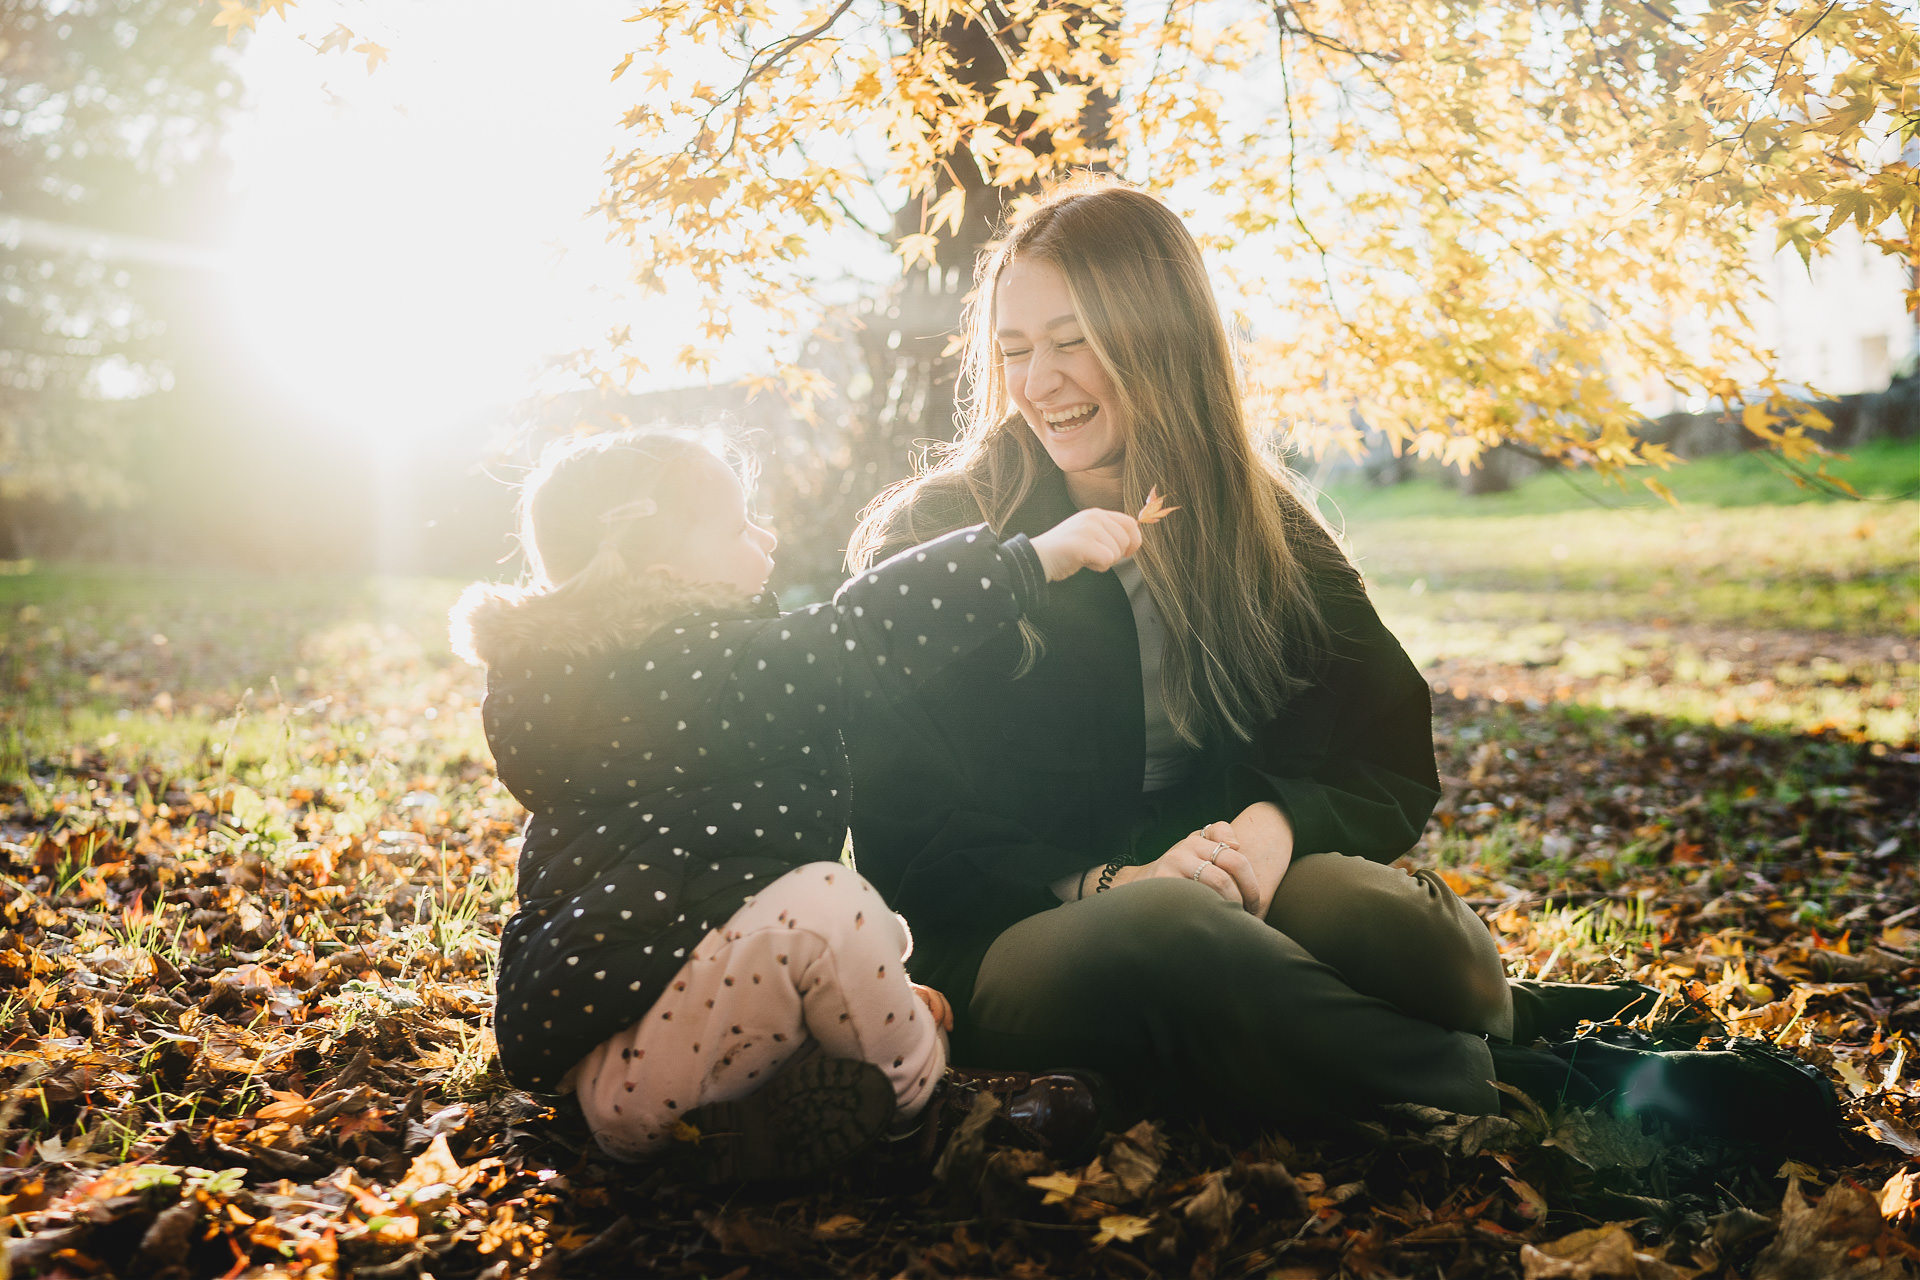 Two sisters laughing together in autumn sunlight